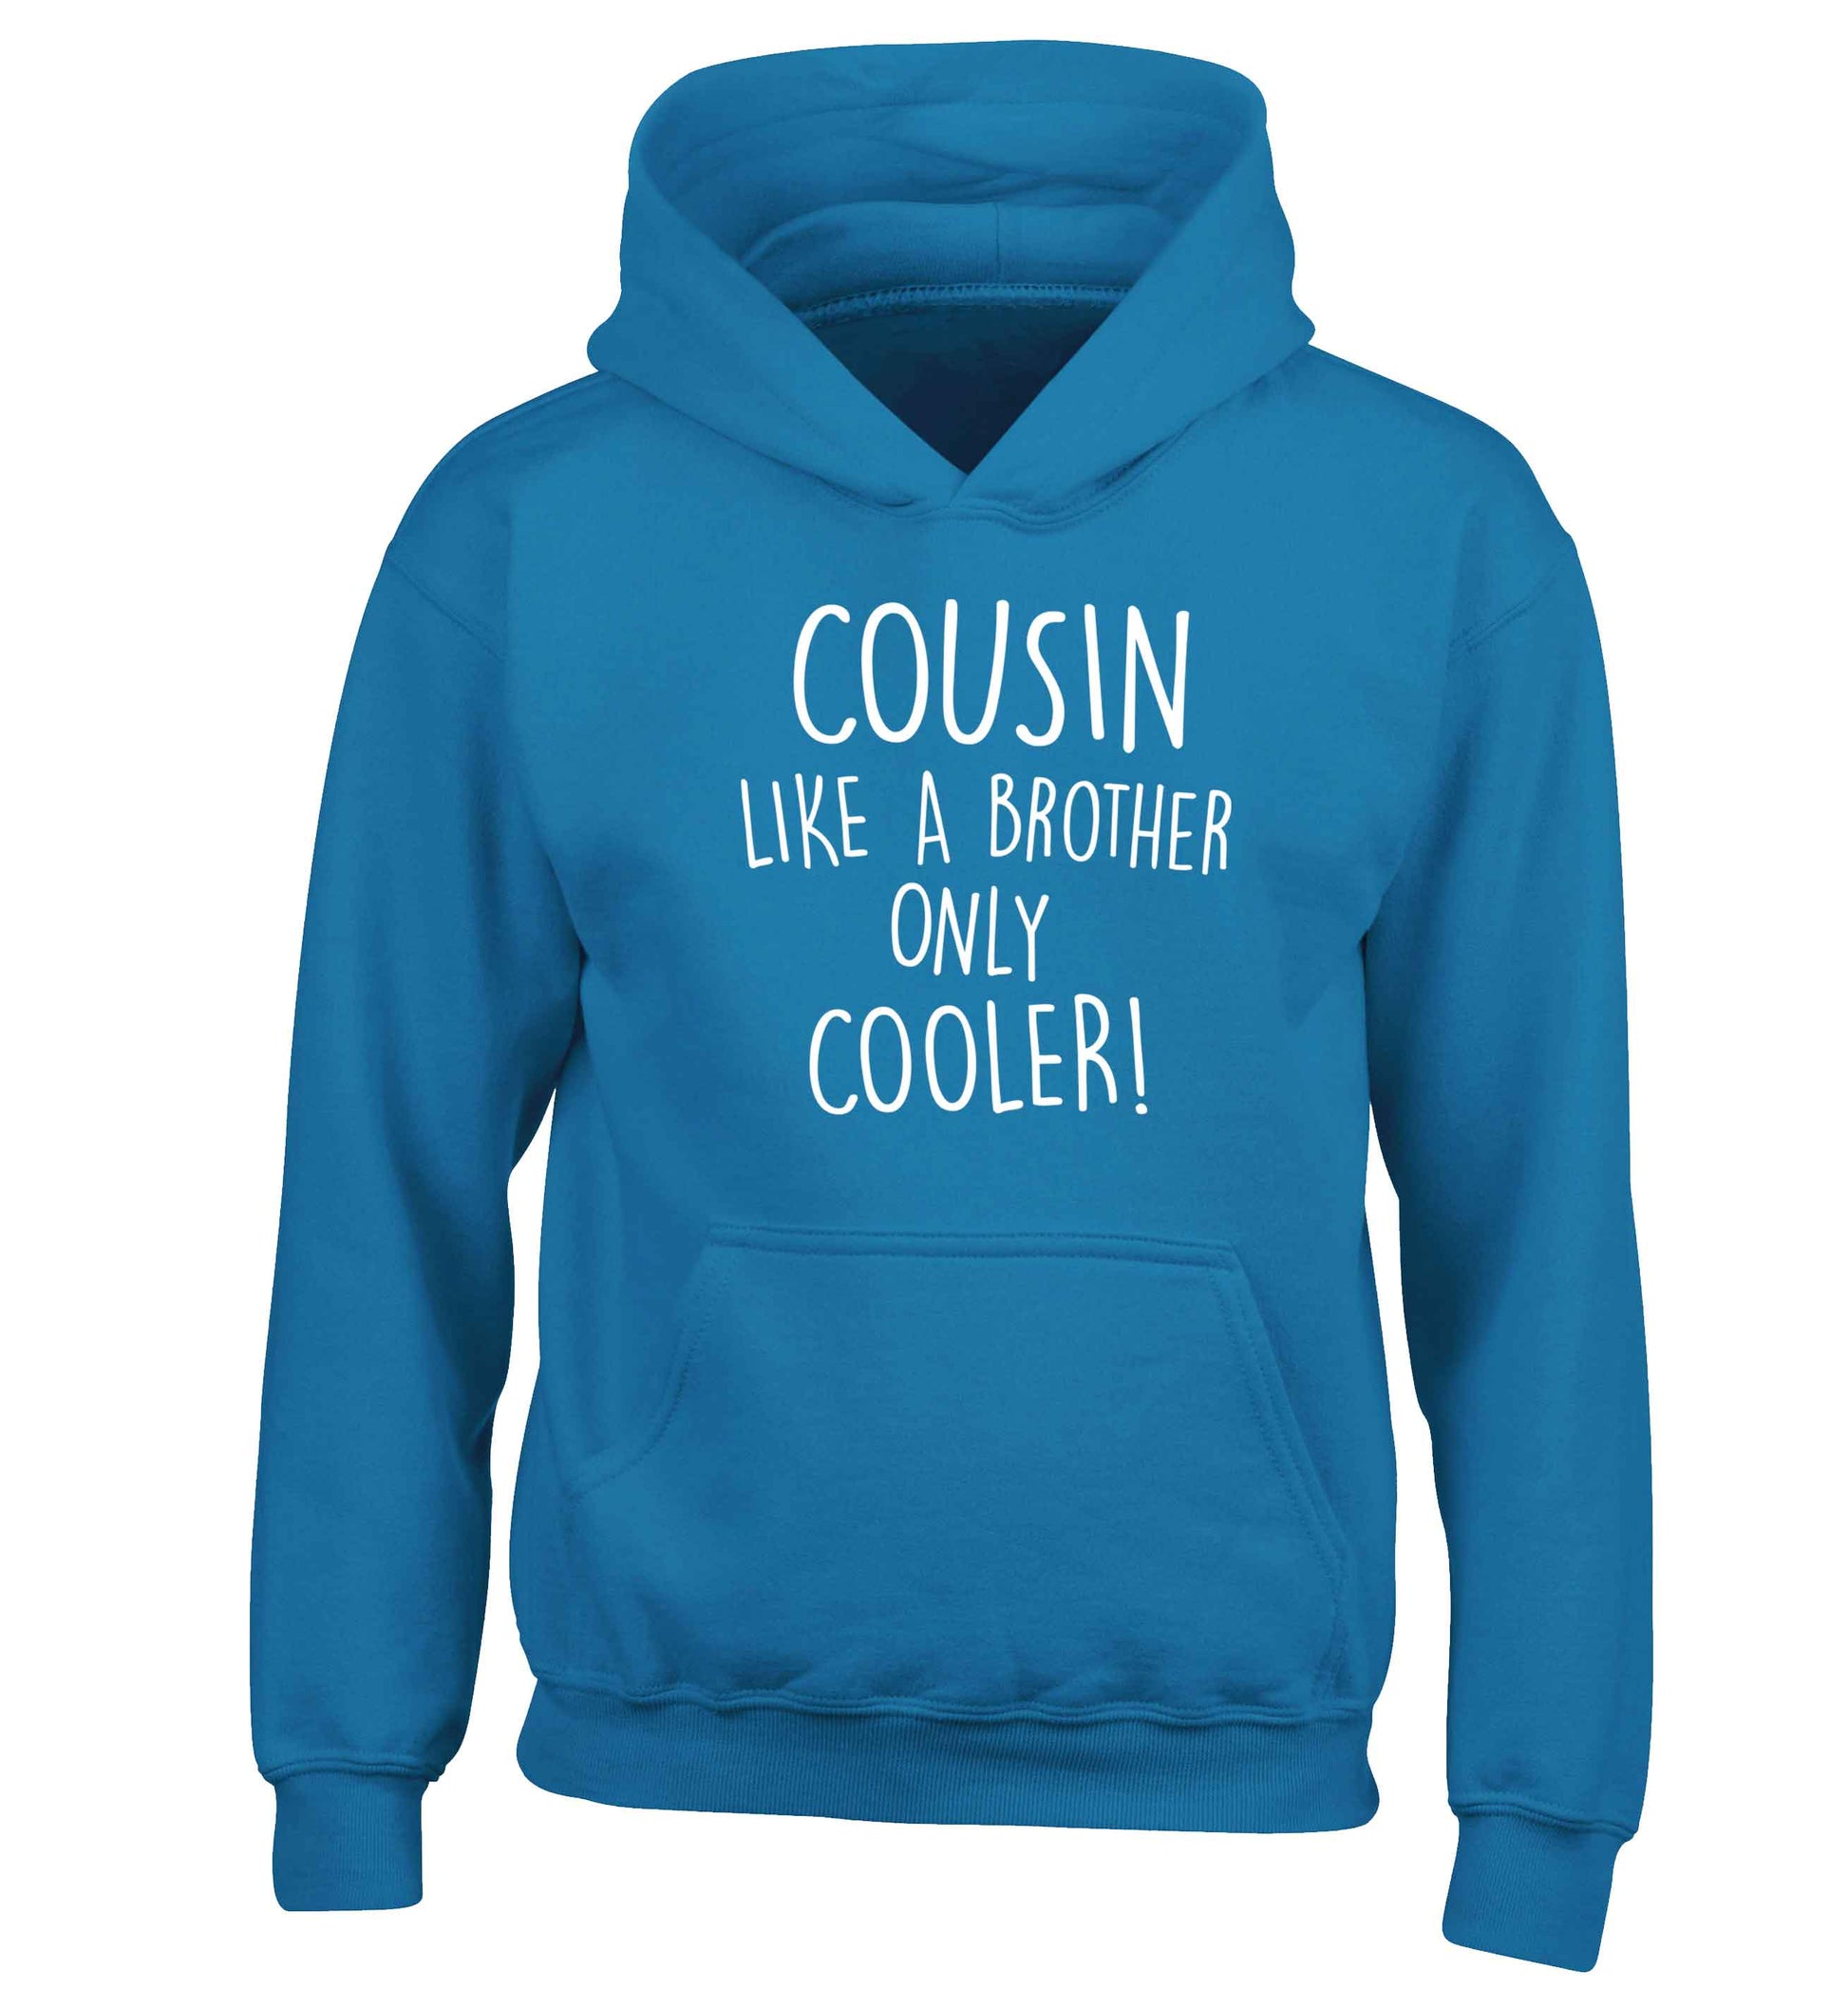 Cousin like a brother only cooler children's blue hoodie 12-13 Years